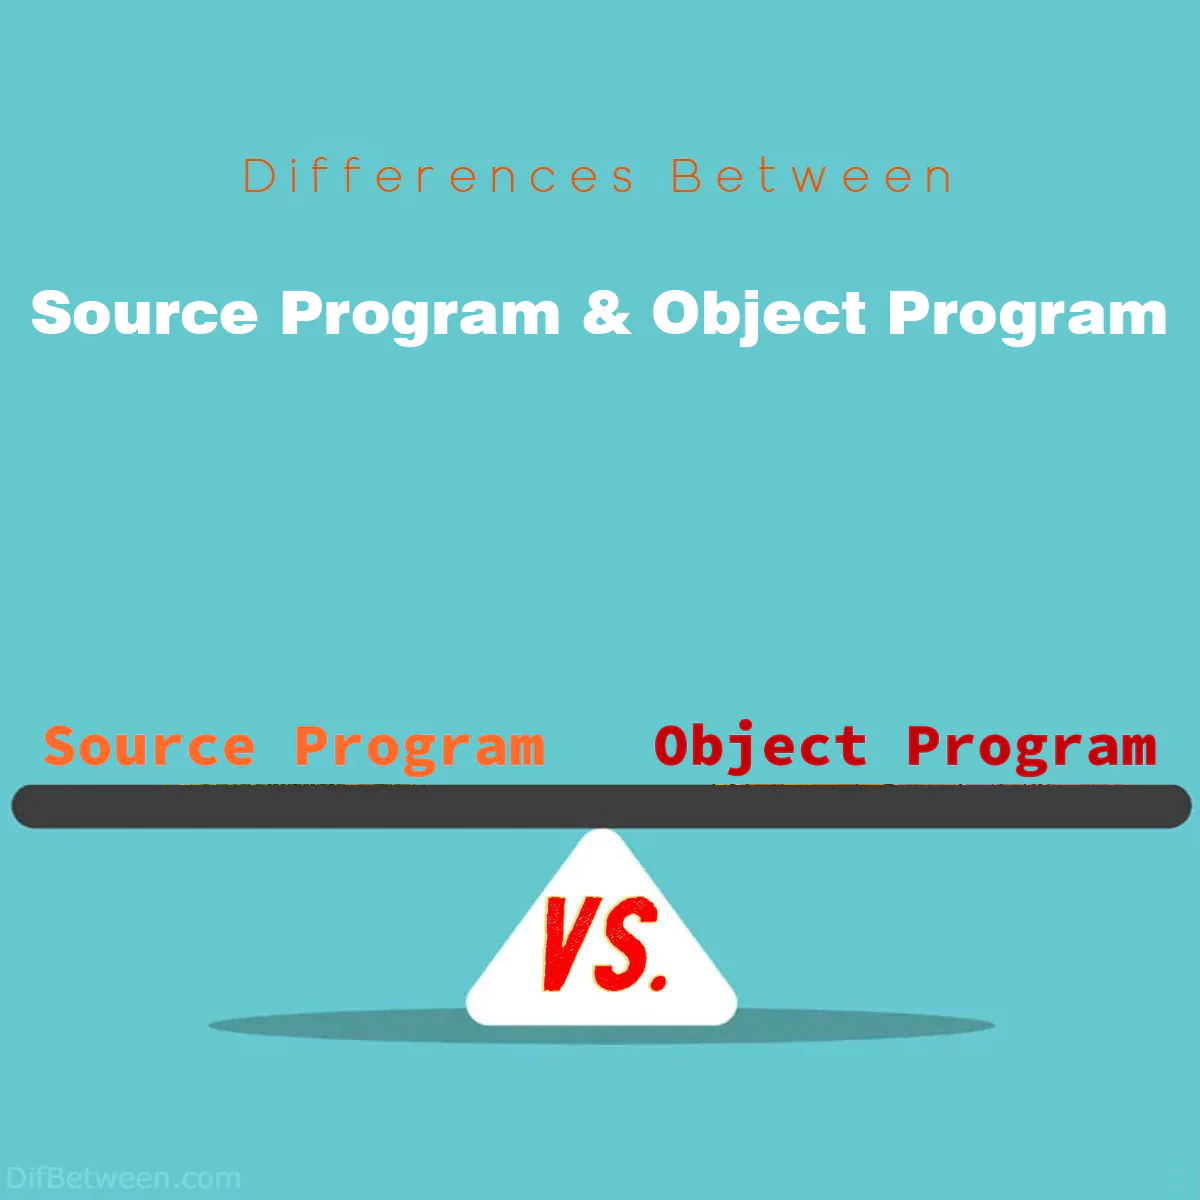 Differences Between Source Program and Object Program